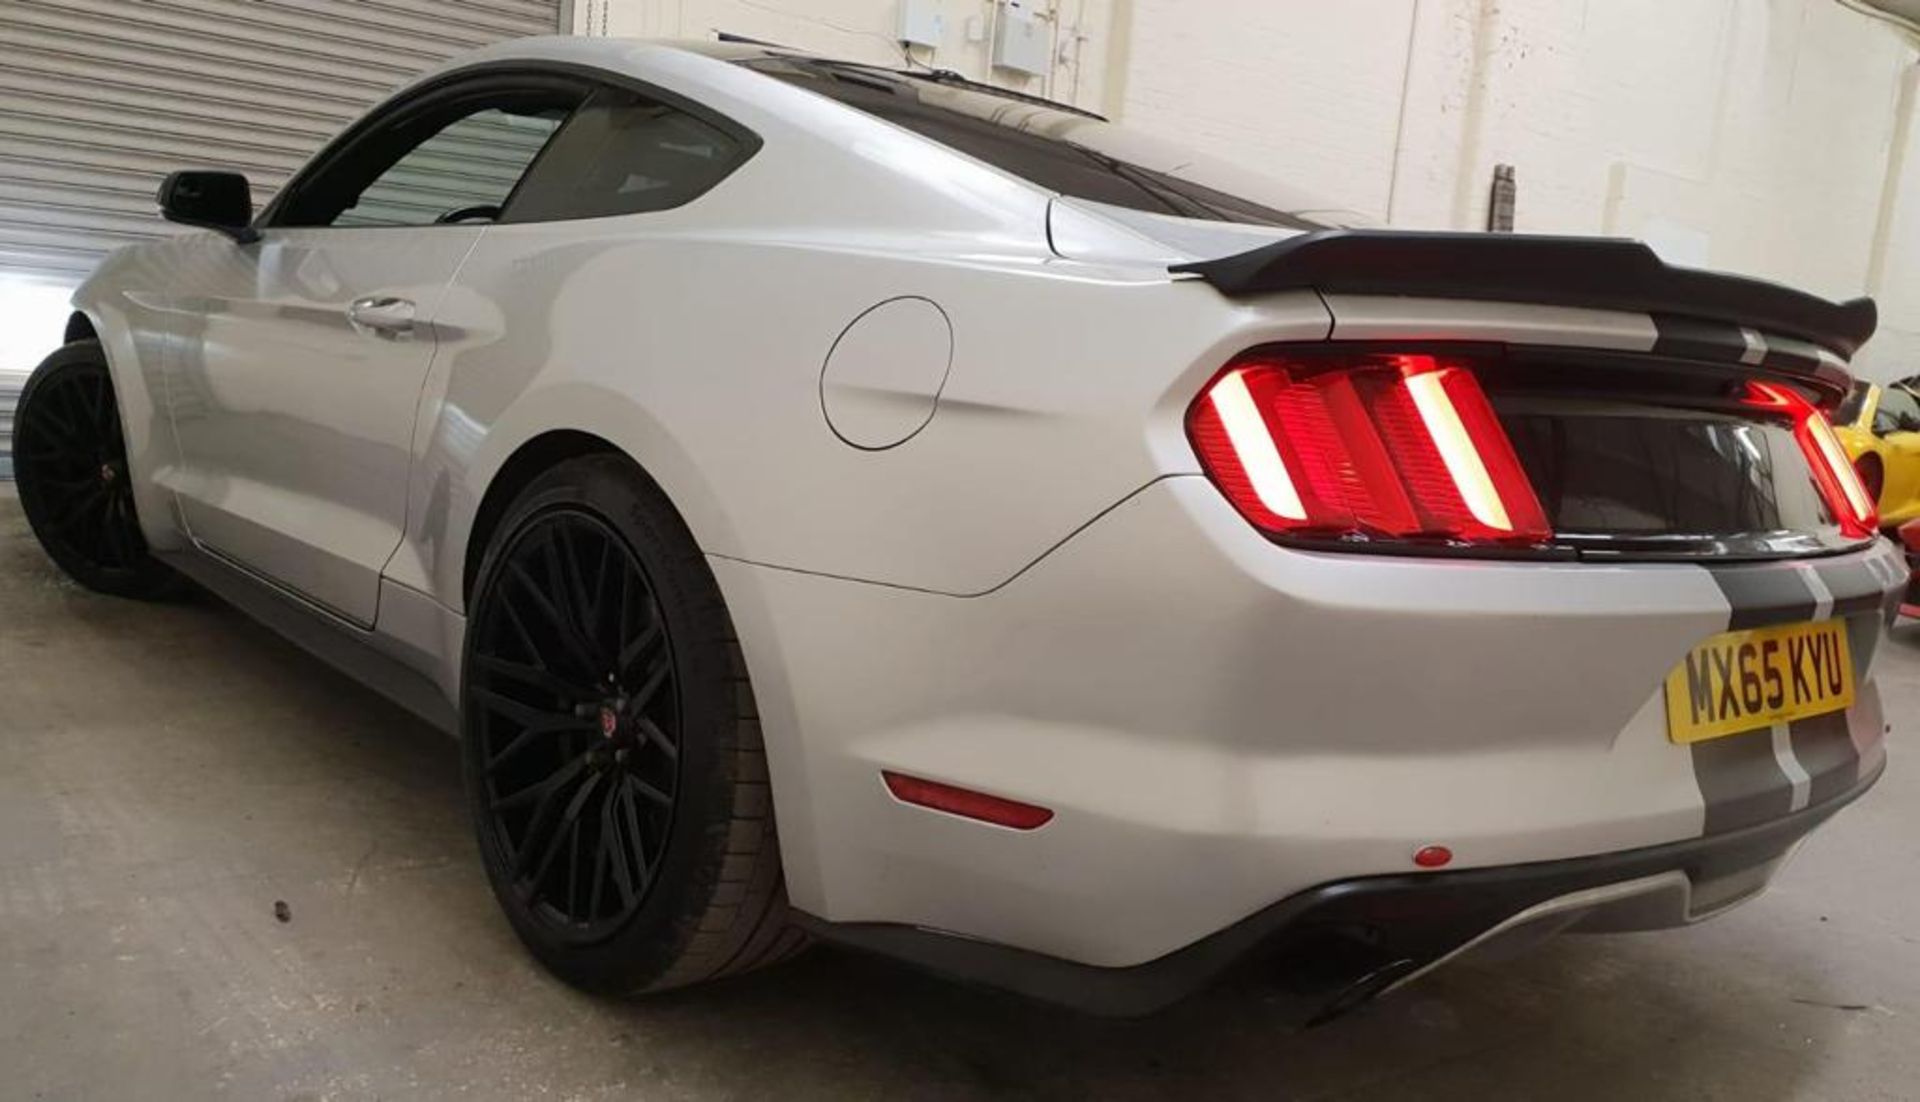 2015/65 REG FORD MUSTANG 5.0 GT LEFT HAND DRIVE, NEW MOT JUST BEEN SERVICED, NEW BRAKES ETC *NO VAT* - Image 7 of 18